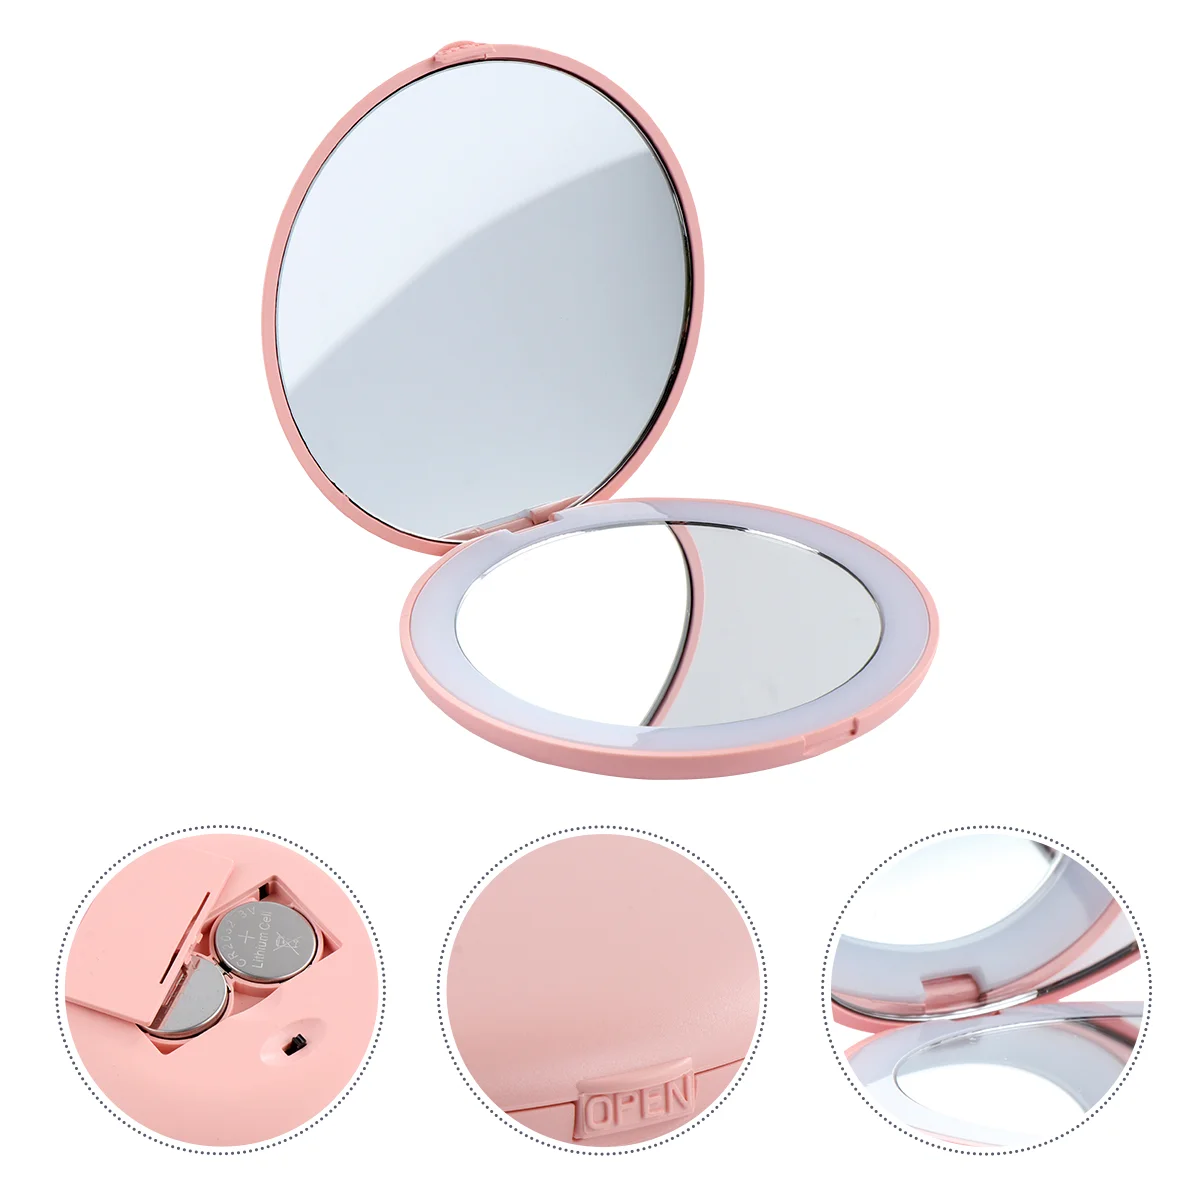 

Travel Makeup Mirror With Light 10 Times Magnifying Makeup Mirror Pocket Glass LED Mini Lighted Magnifier Shine Travel Abs